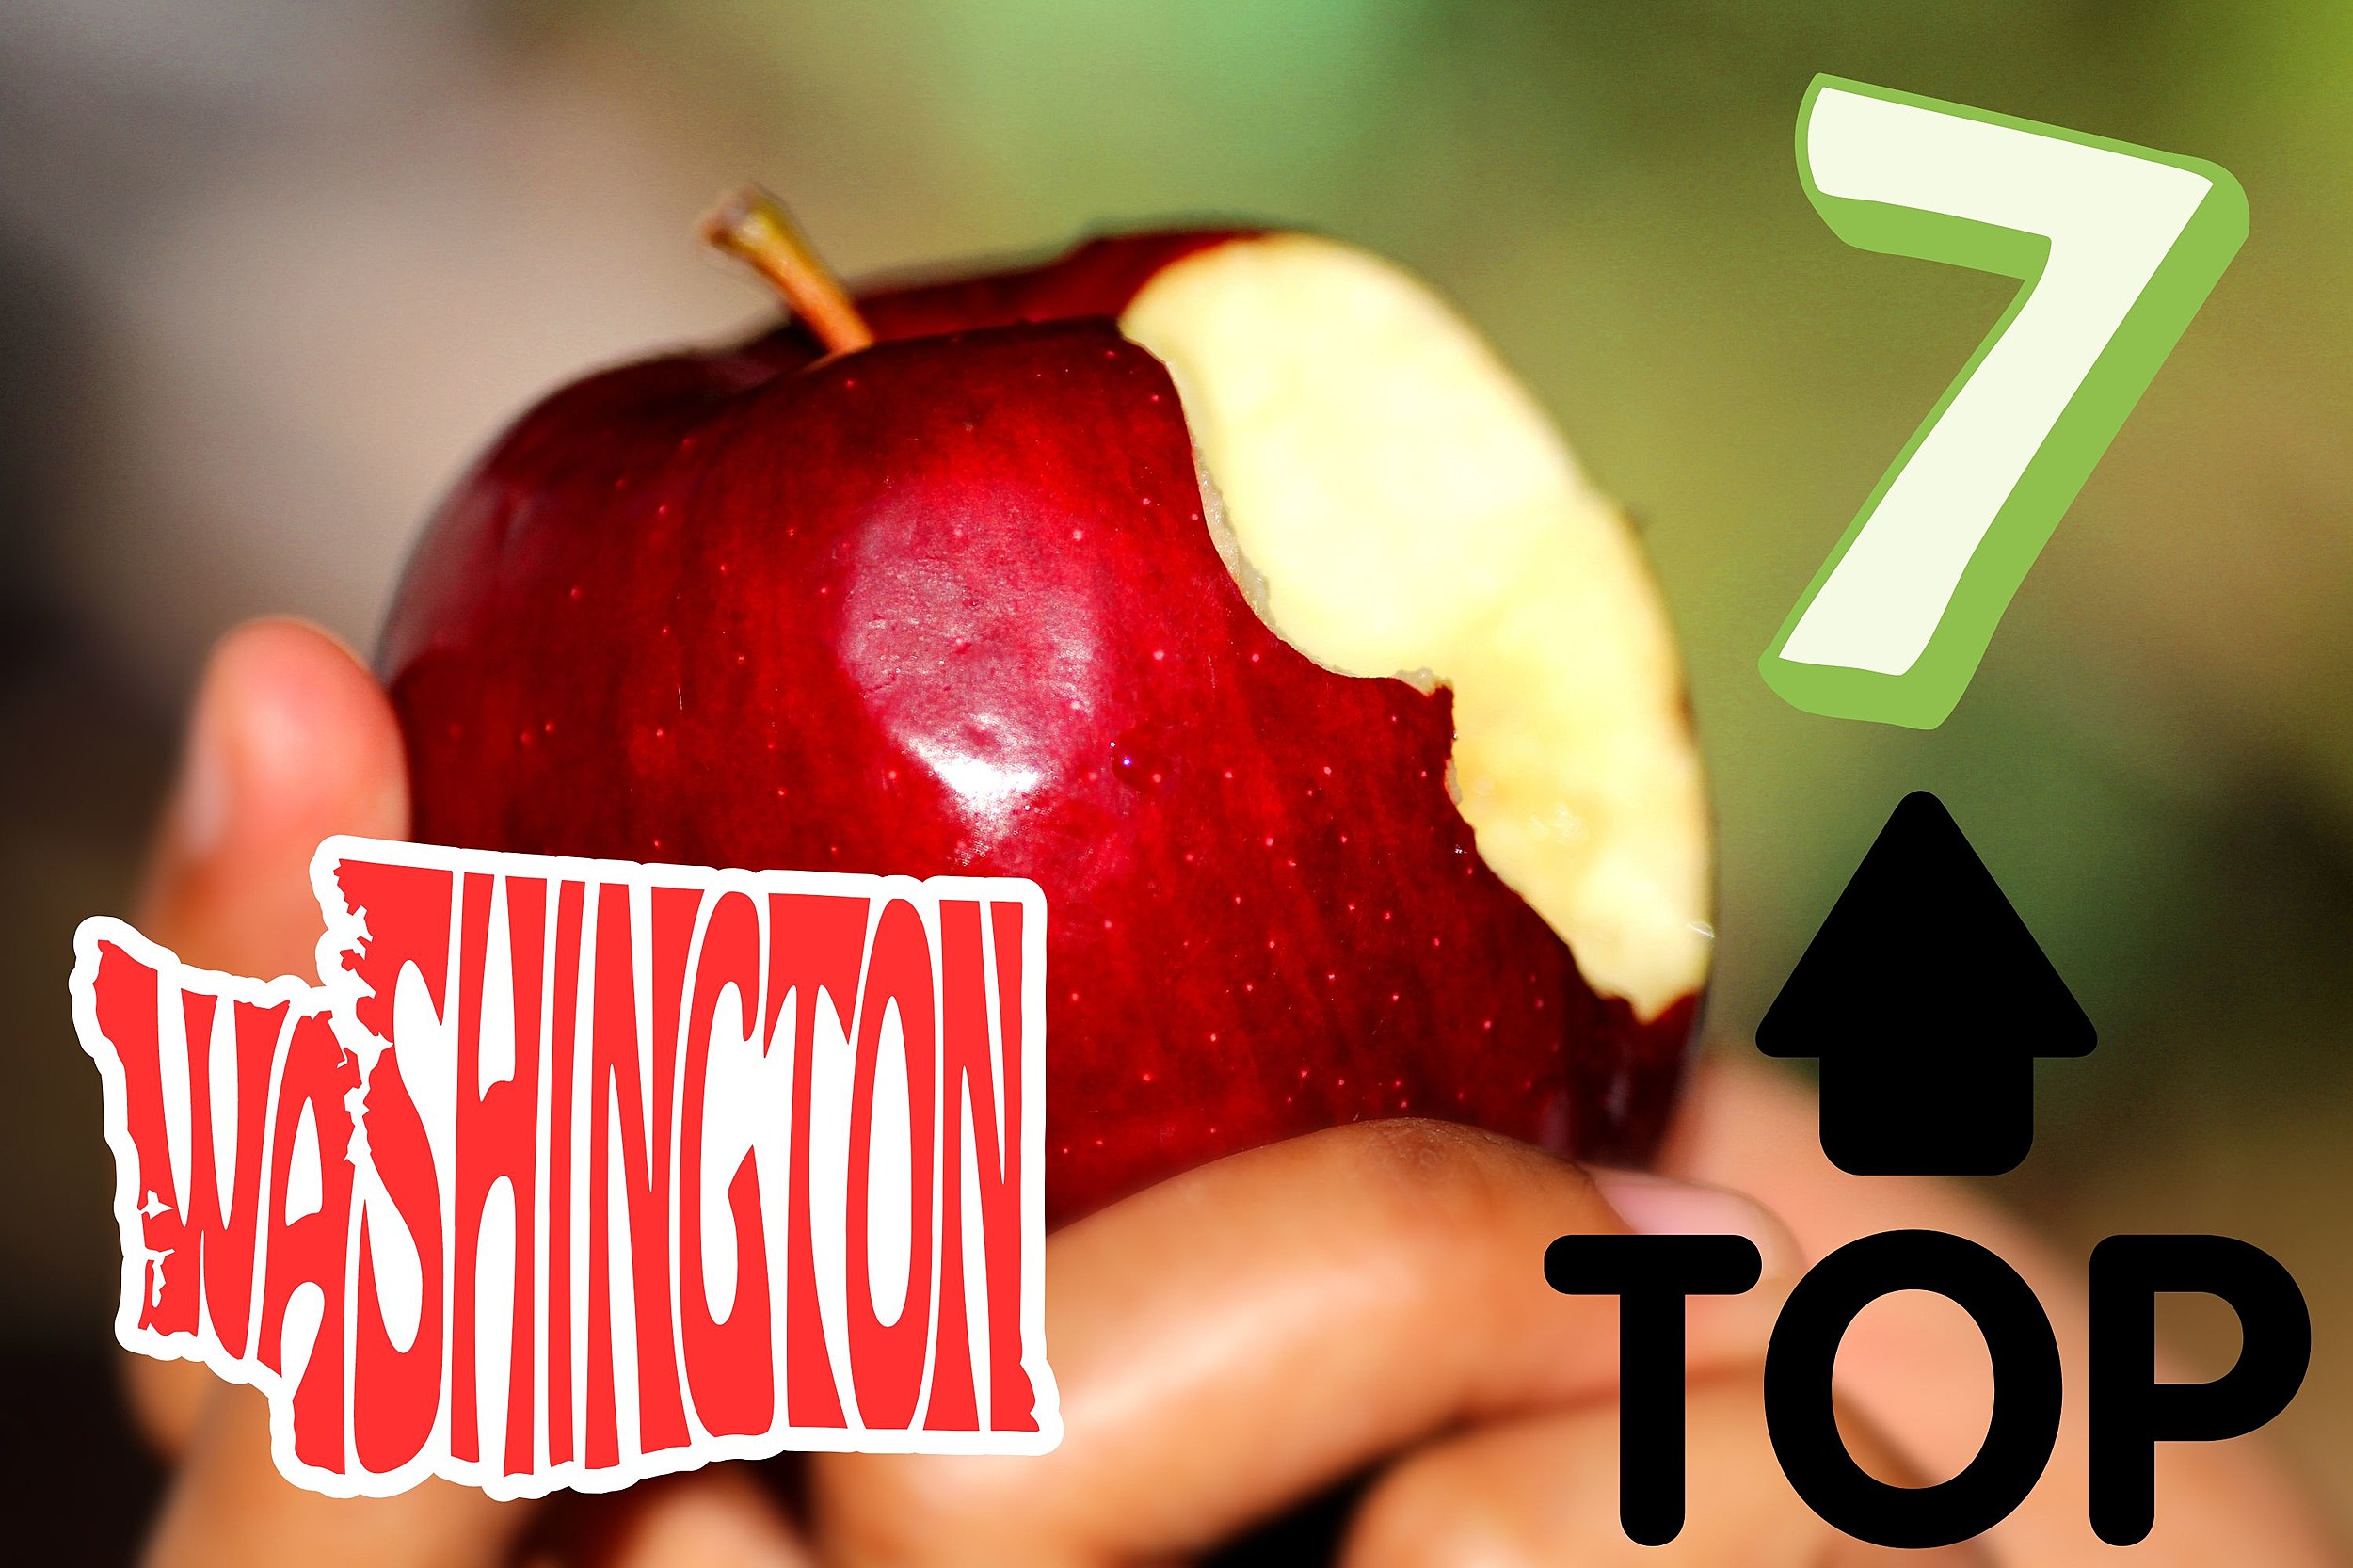 Washington State Apples Are In The Bag - Produce Business